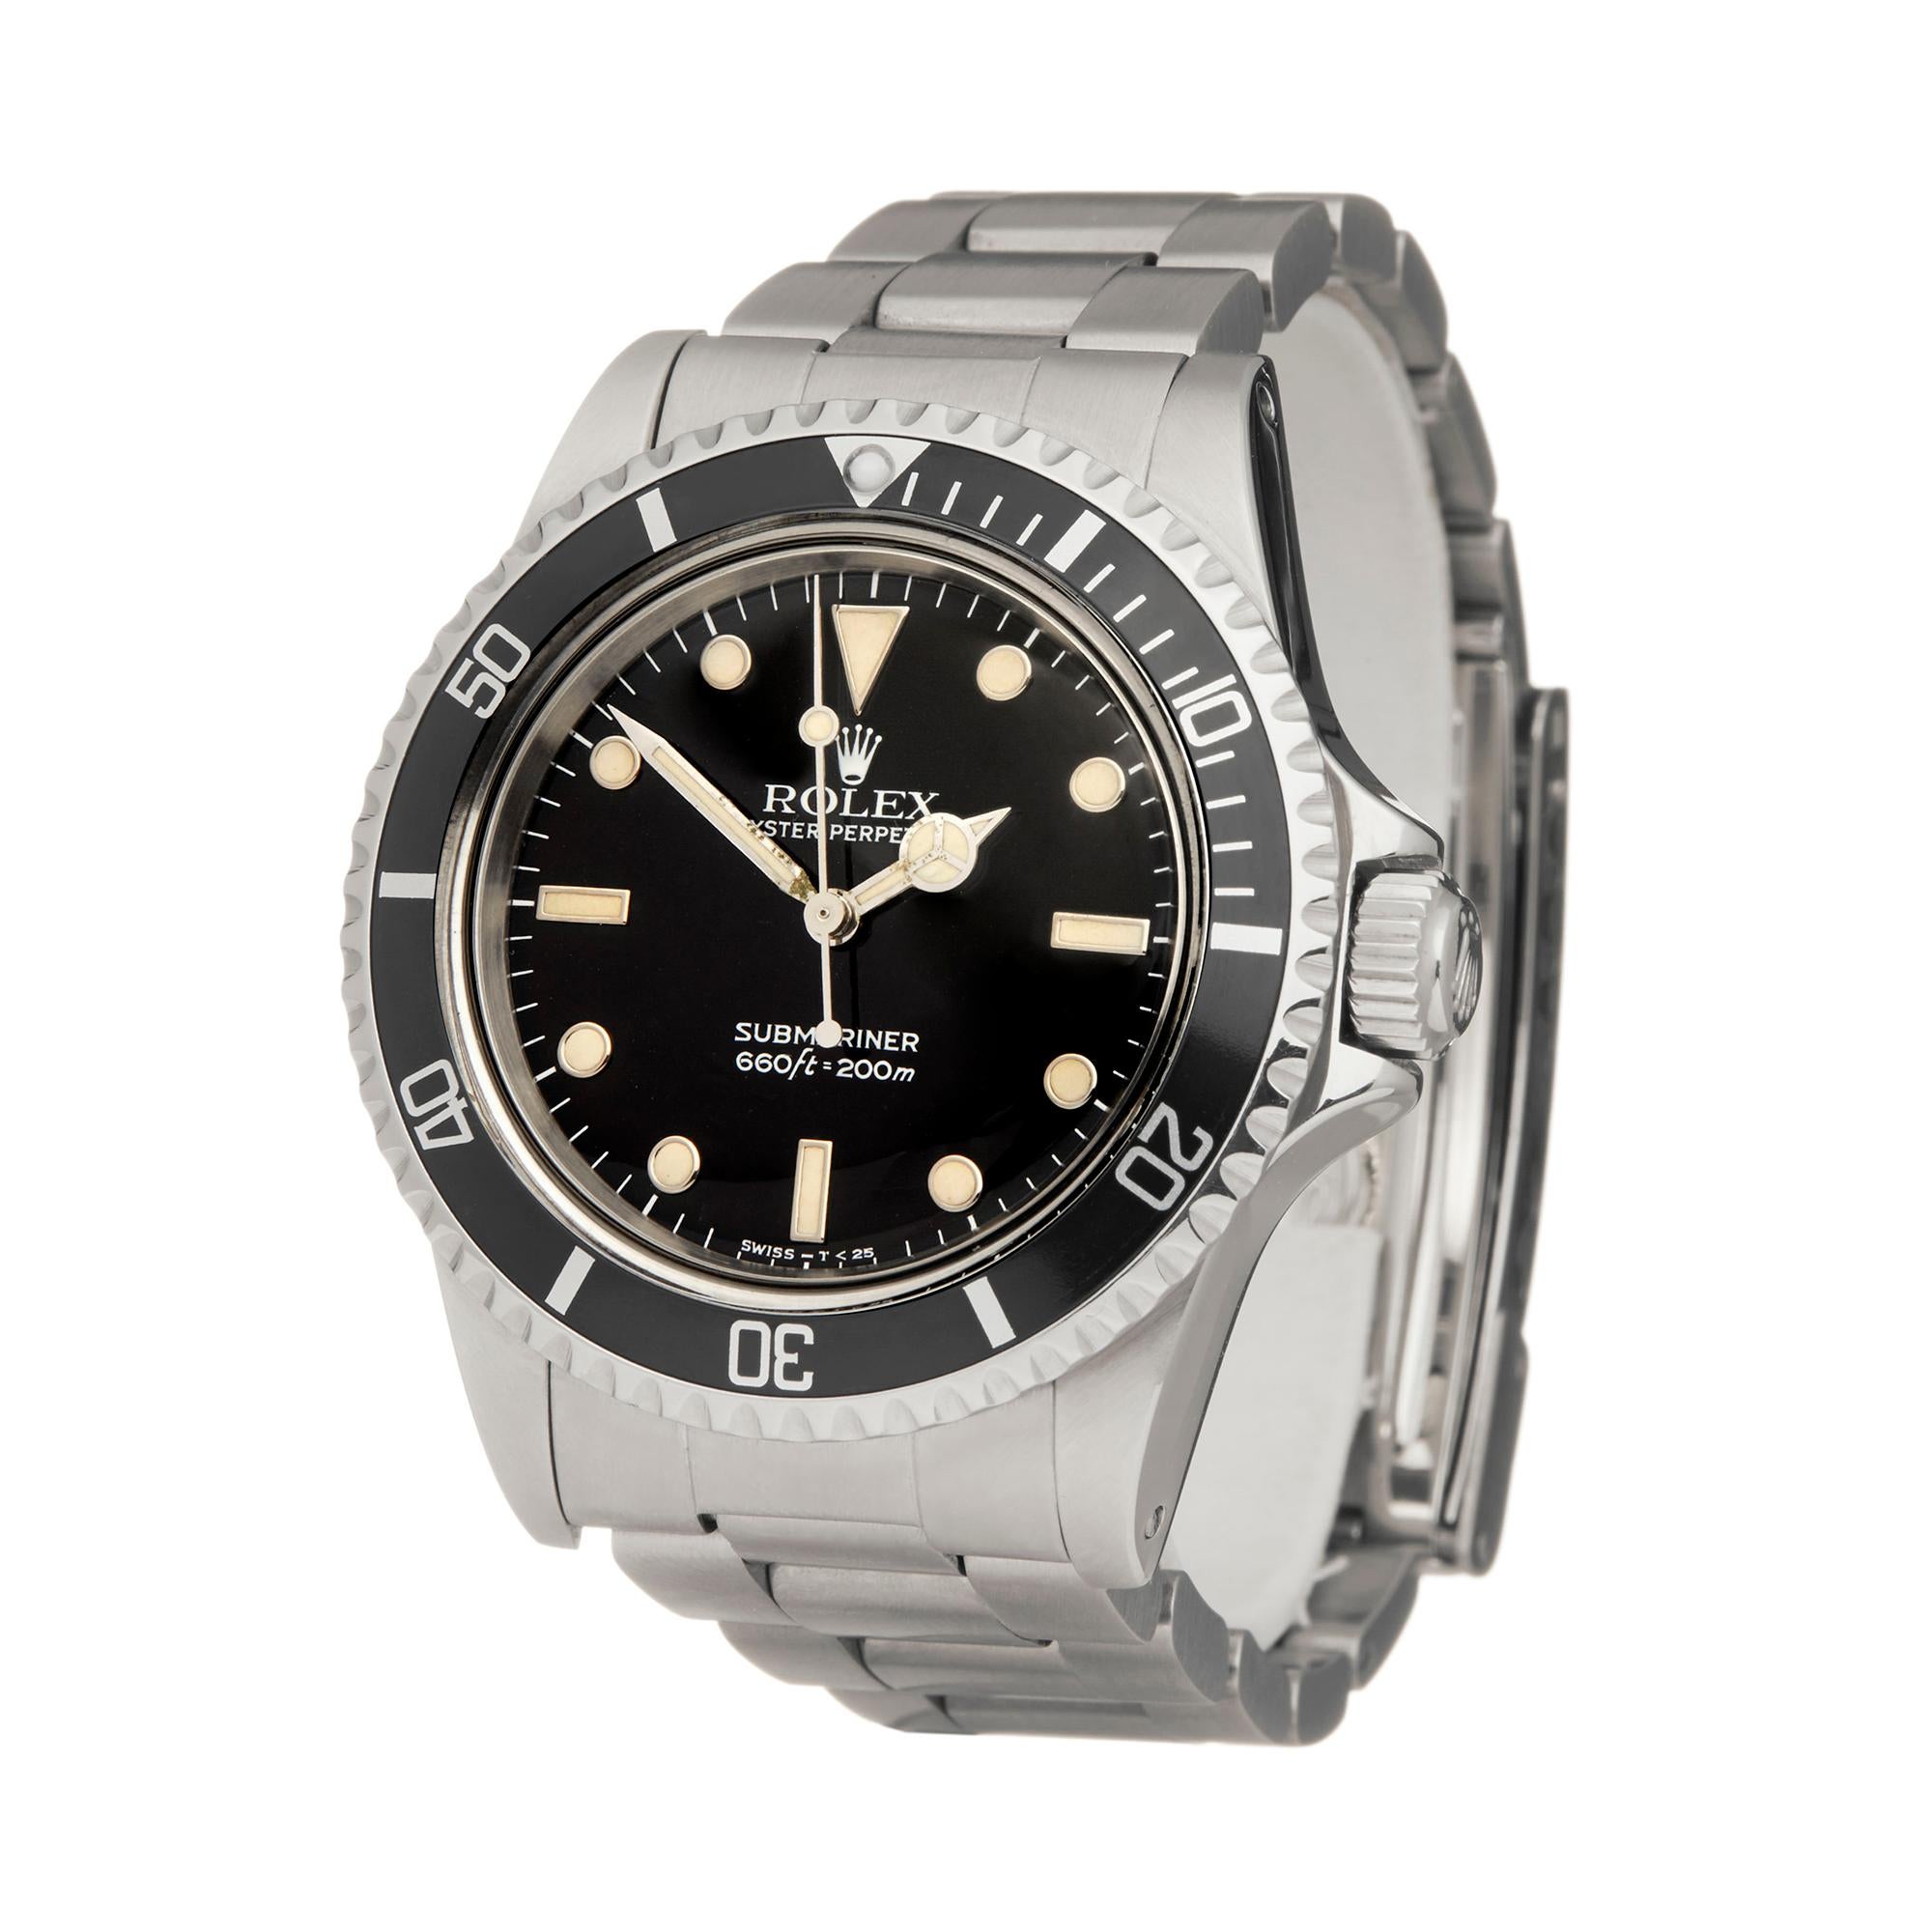 Reference: W6052
Manufacturer: Rolex
Model: Submariner
Model Reference: 5513
Age: Circa 1984
Gender: Men's
Box and Papers: Box only
Dial: Black
Glass: Plexiglass
Movement: Automatic
Water Resistance: To Manufacturers Specifications
Case: Stainless